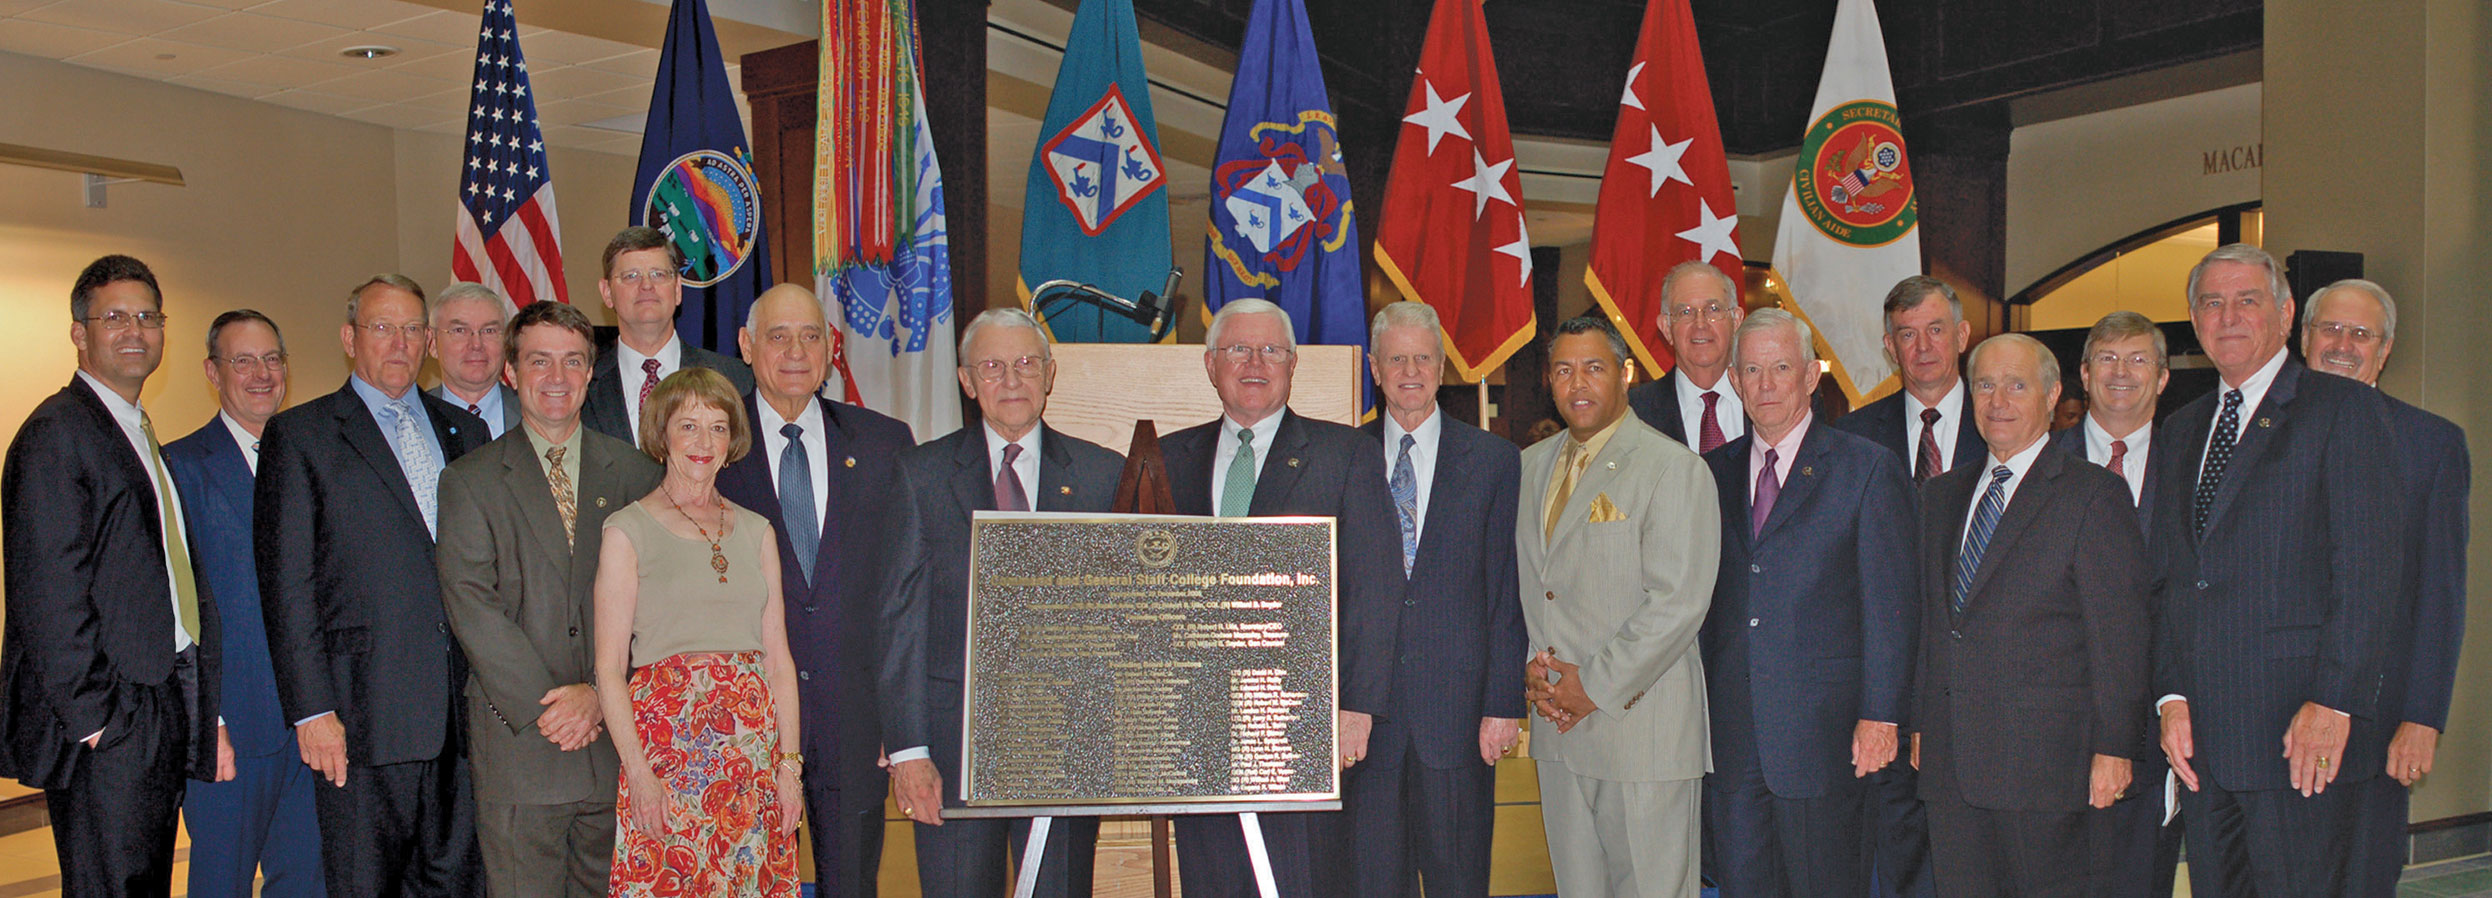 Foundation trustees of the CGSC Foundation gather at a reception in the Lewis and Clark Center on Aug. 12, 2007 and unveil a bronze plaque commemorating the CGSC Foundation’s incorporation. Col. (Ret.) Bill Eckhardt is seventh from right. The Foundation hosted the reception in honor of the College’s official dedication of the building on Aug. 14, 2007.